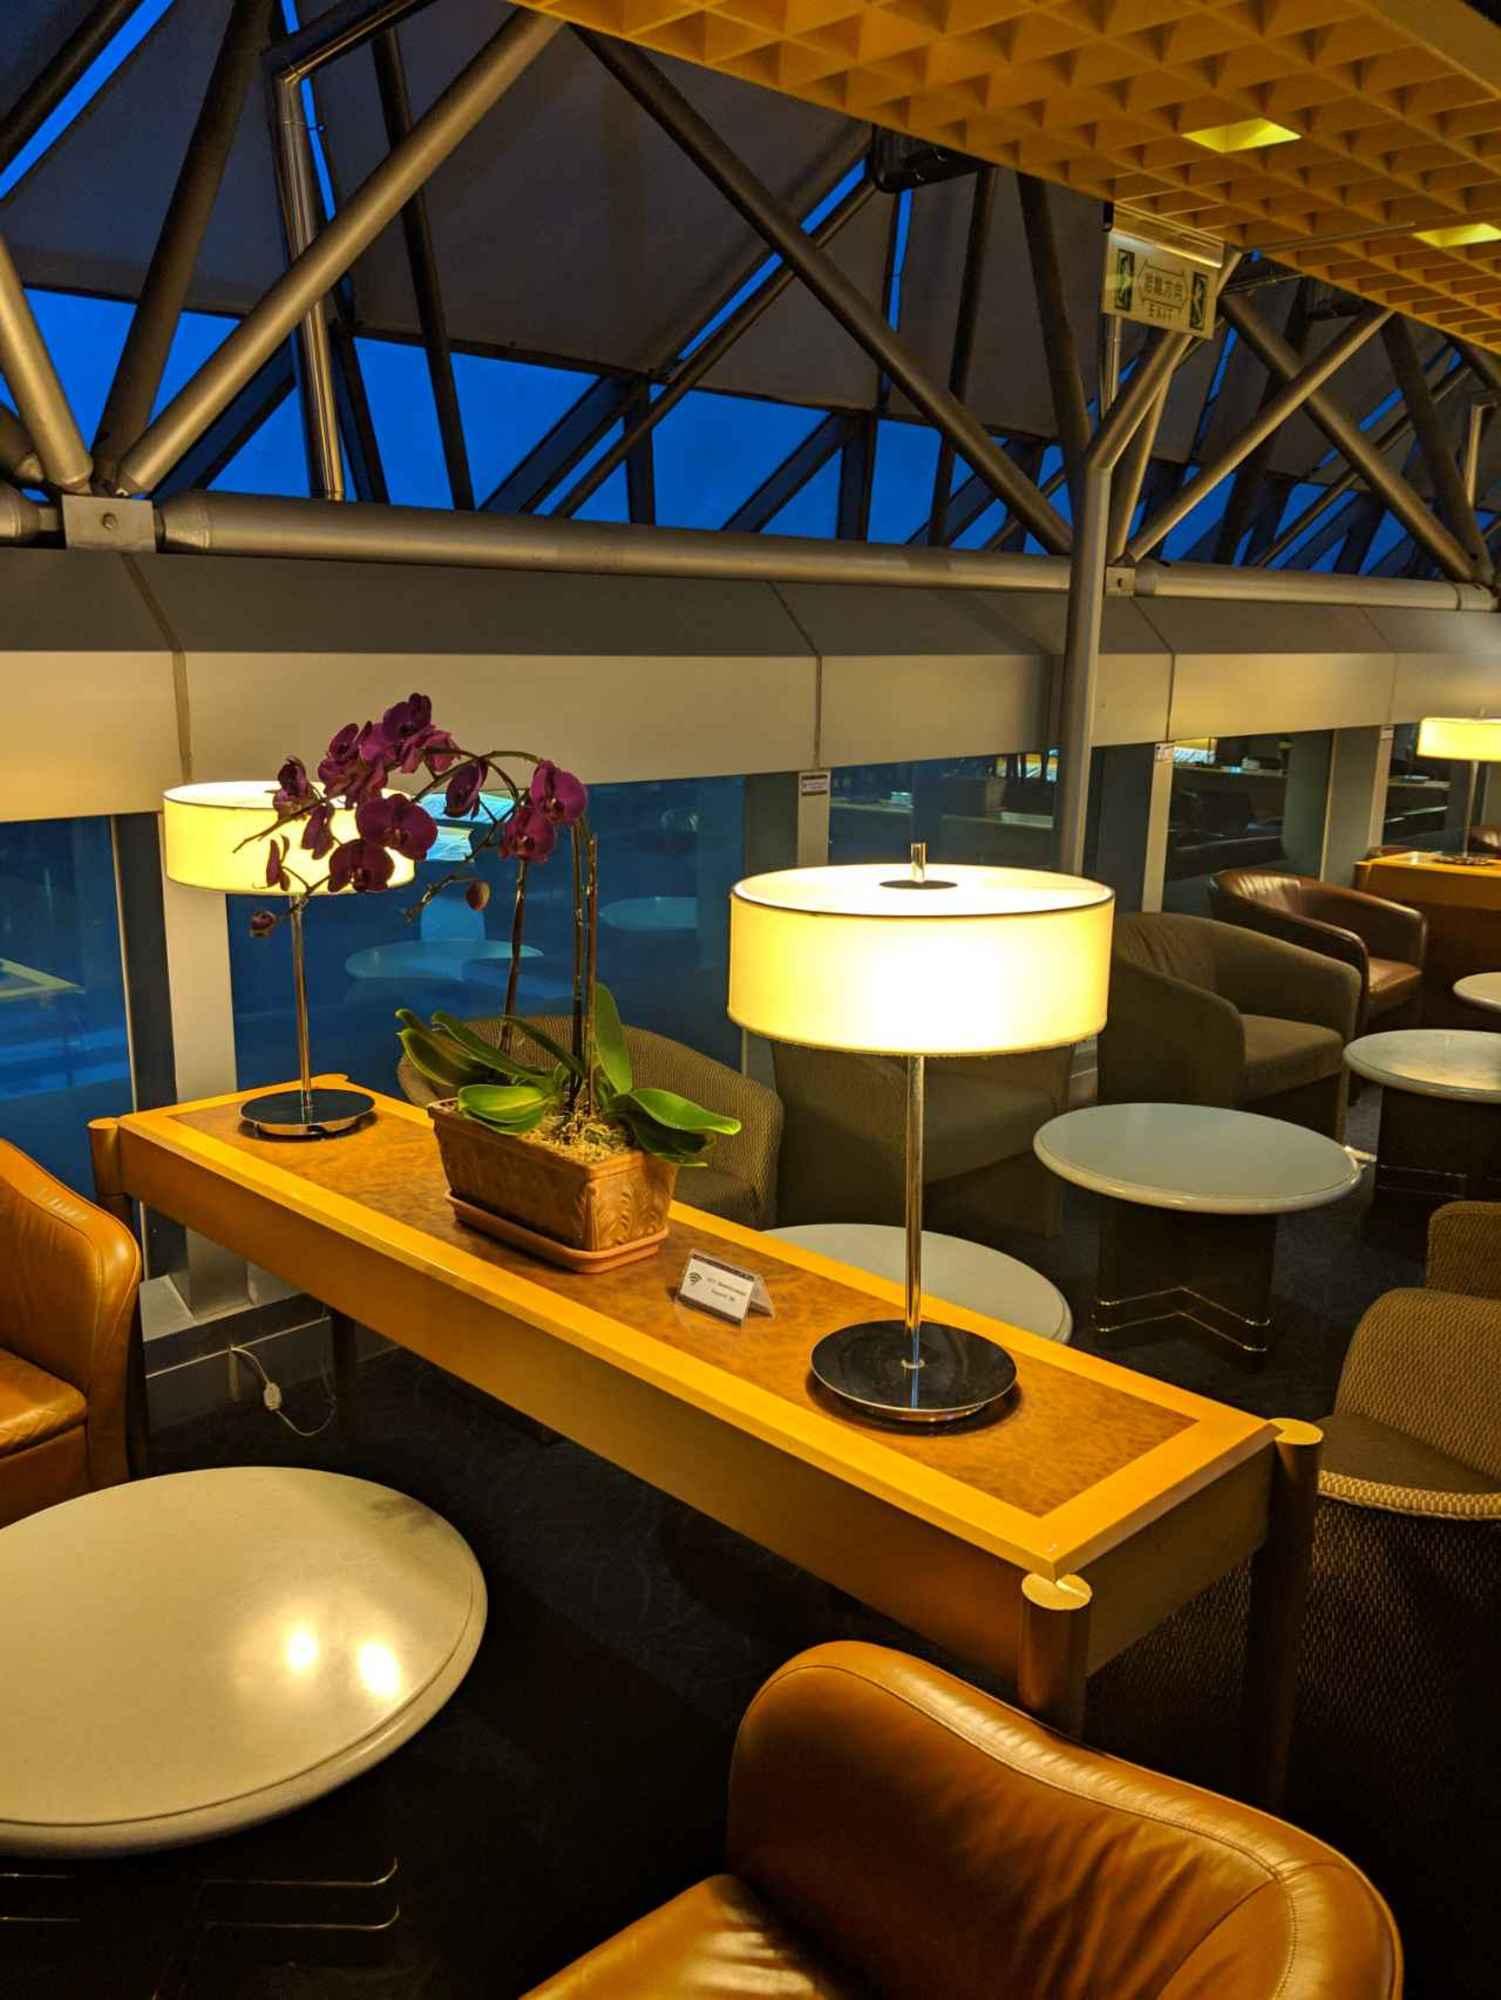 Singapore Airlines SilverKris Business Class Lounge image 12 of 14